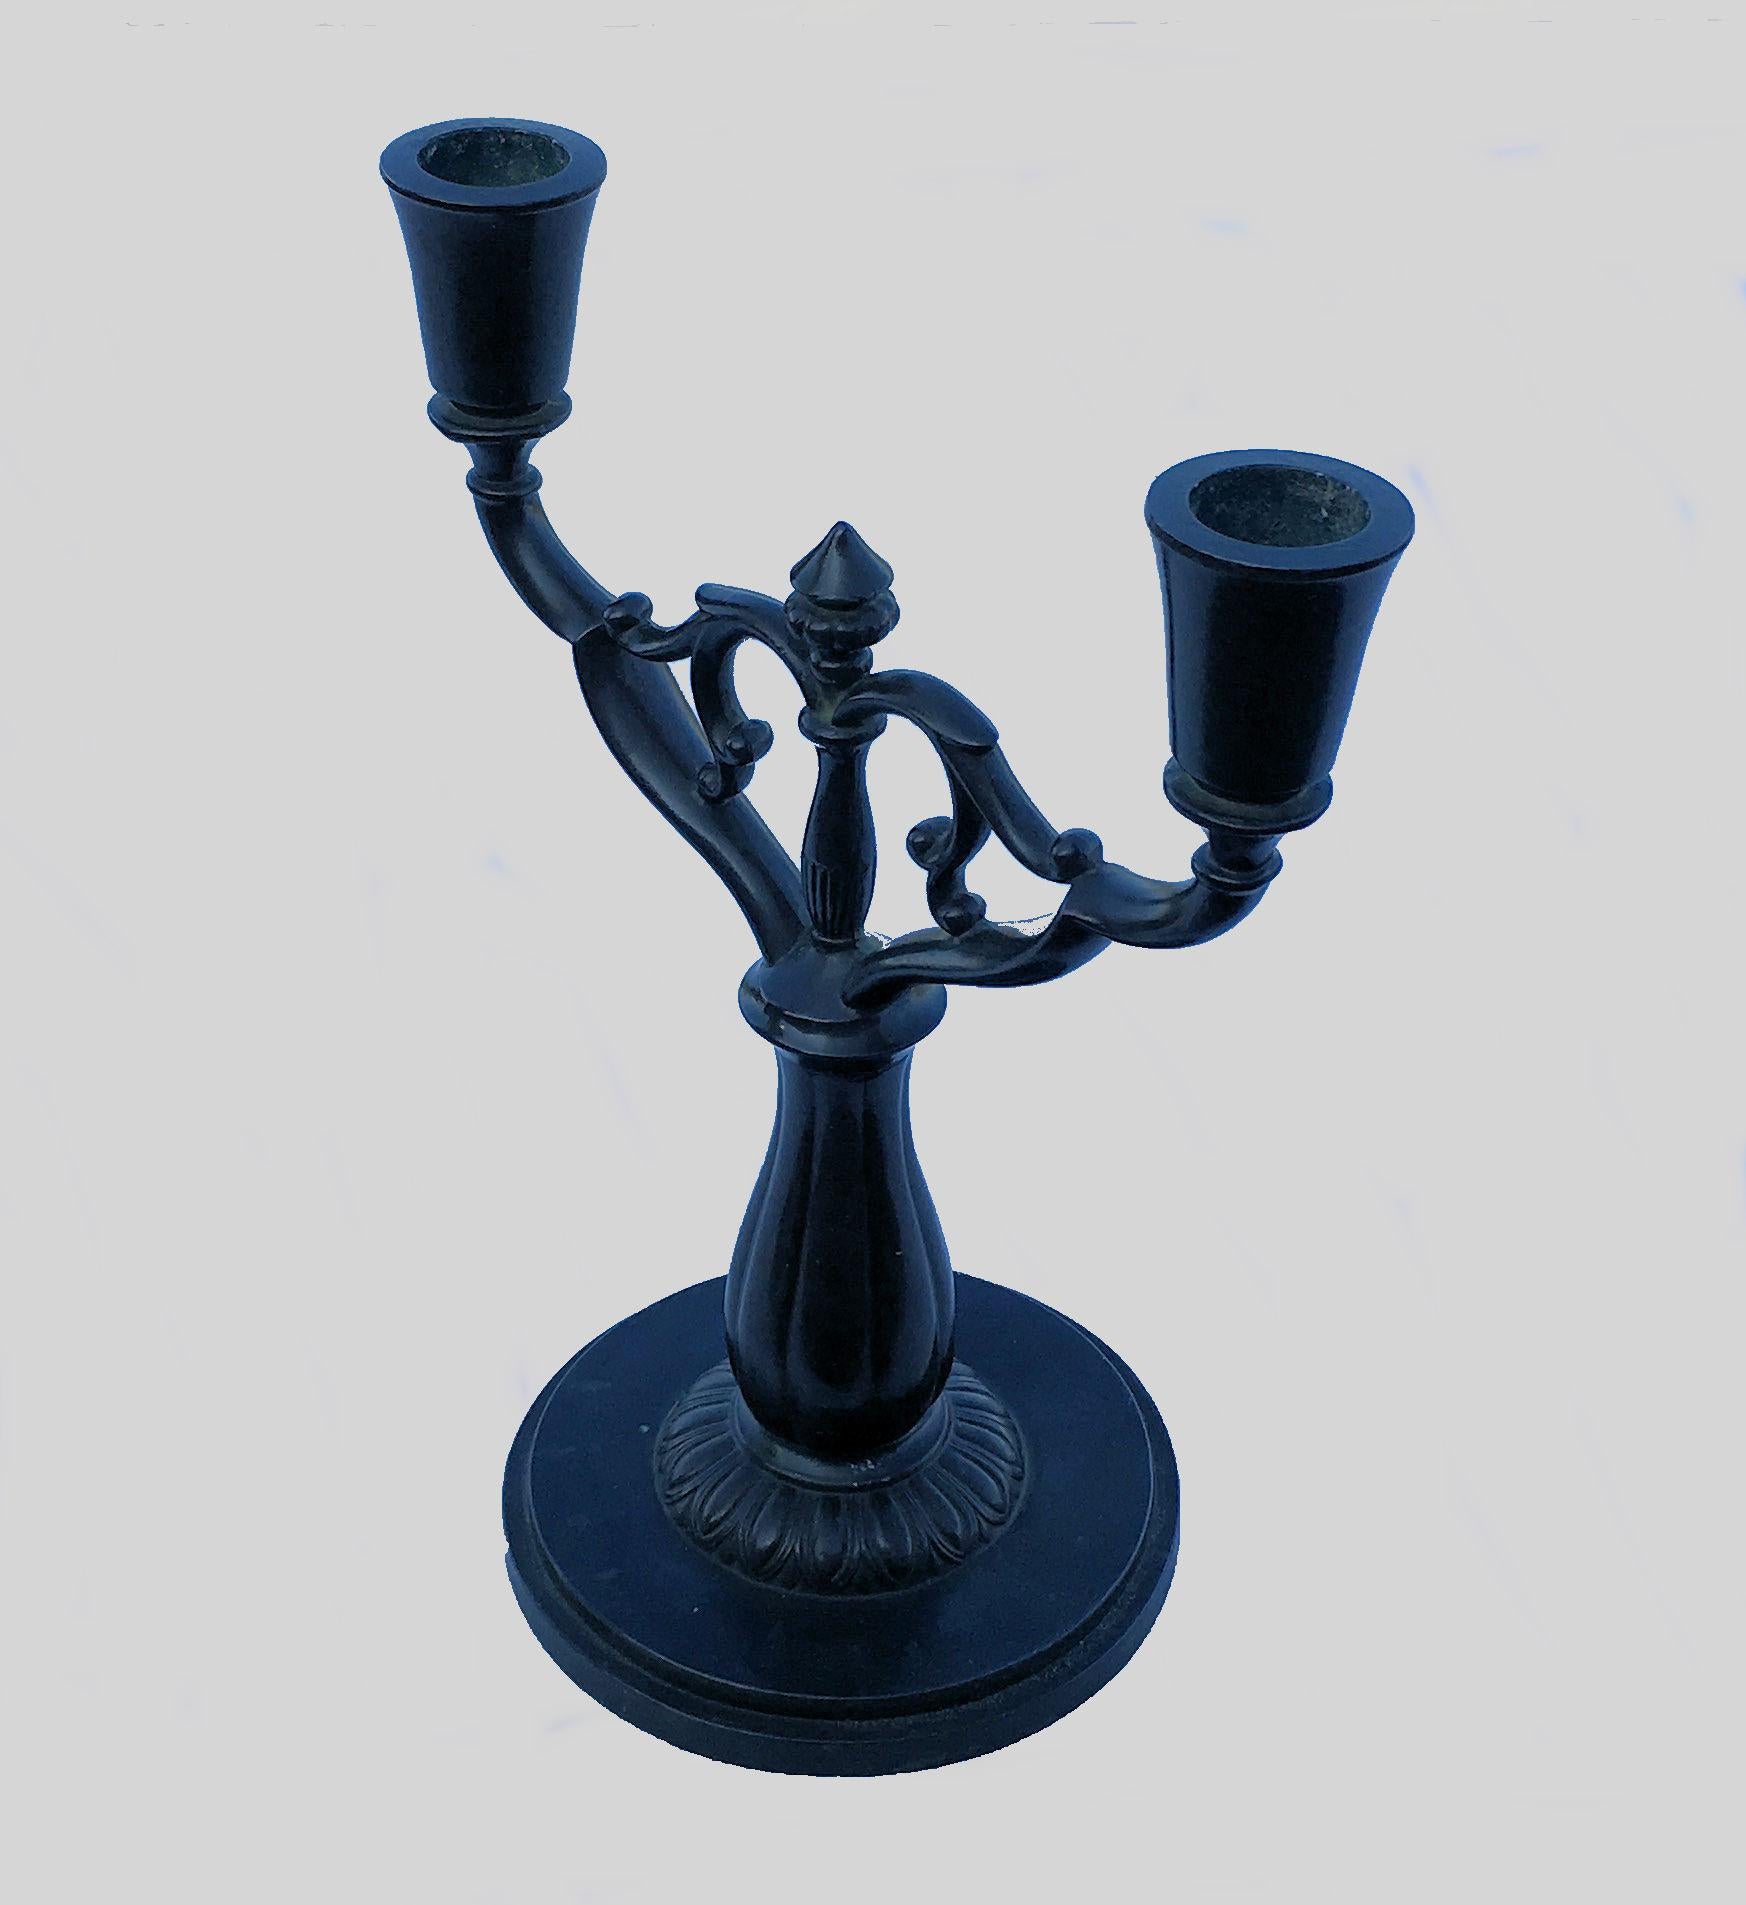 Art Deco Danish two-armed candleholder by Just Andersen in Disko Metal

The candleholder is made in disko metal, an alloy of lead and antimony, which was Andersen's own invention and named after the Disko Bay in Greenland, where he grew up.

The